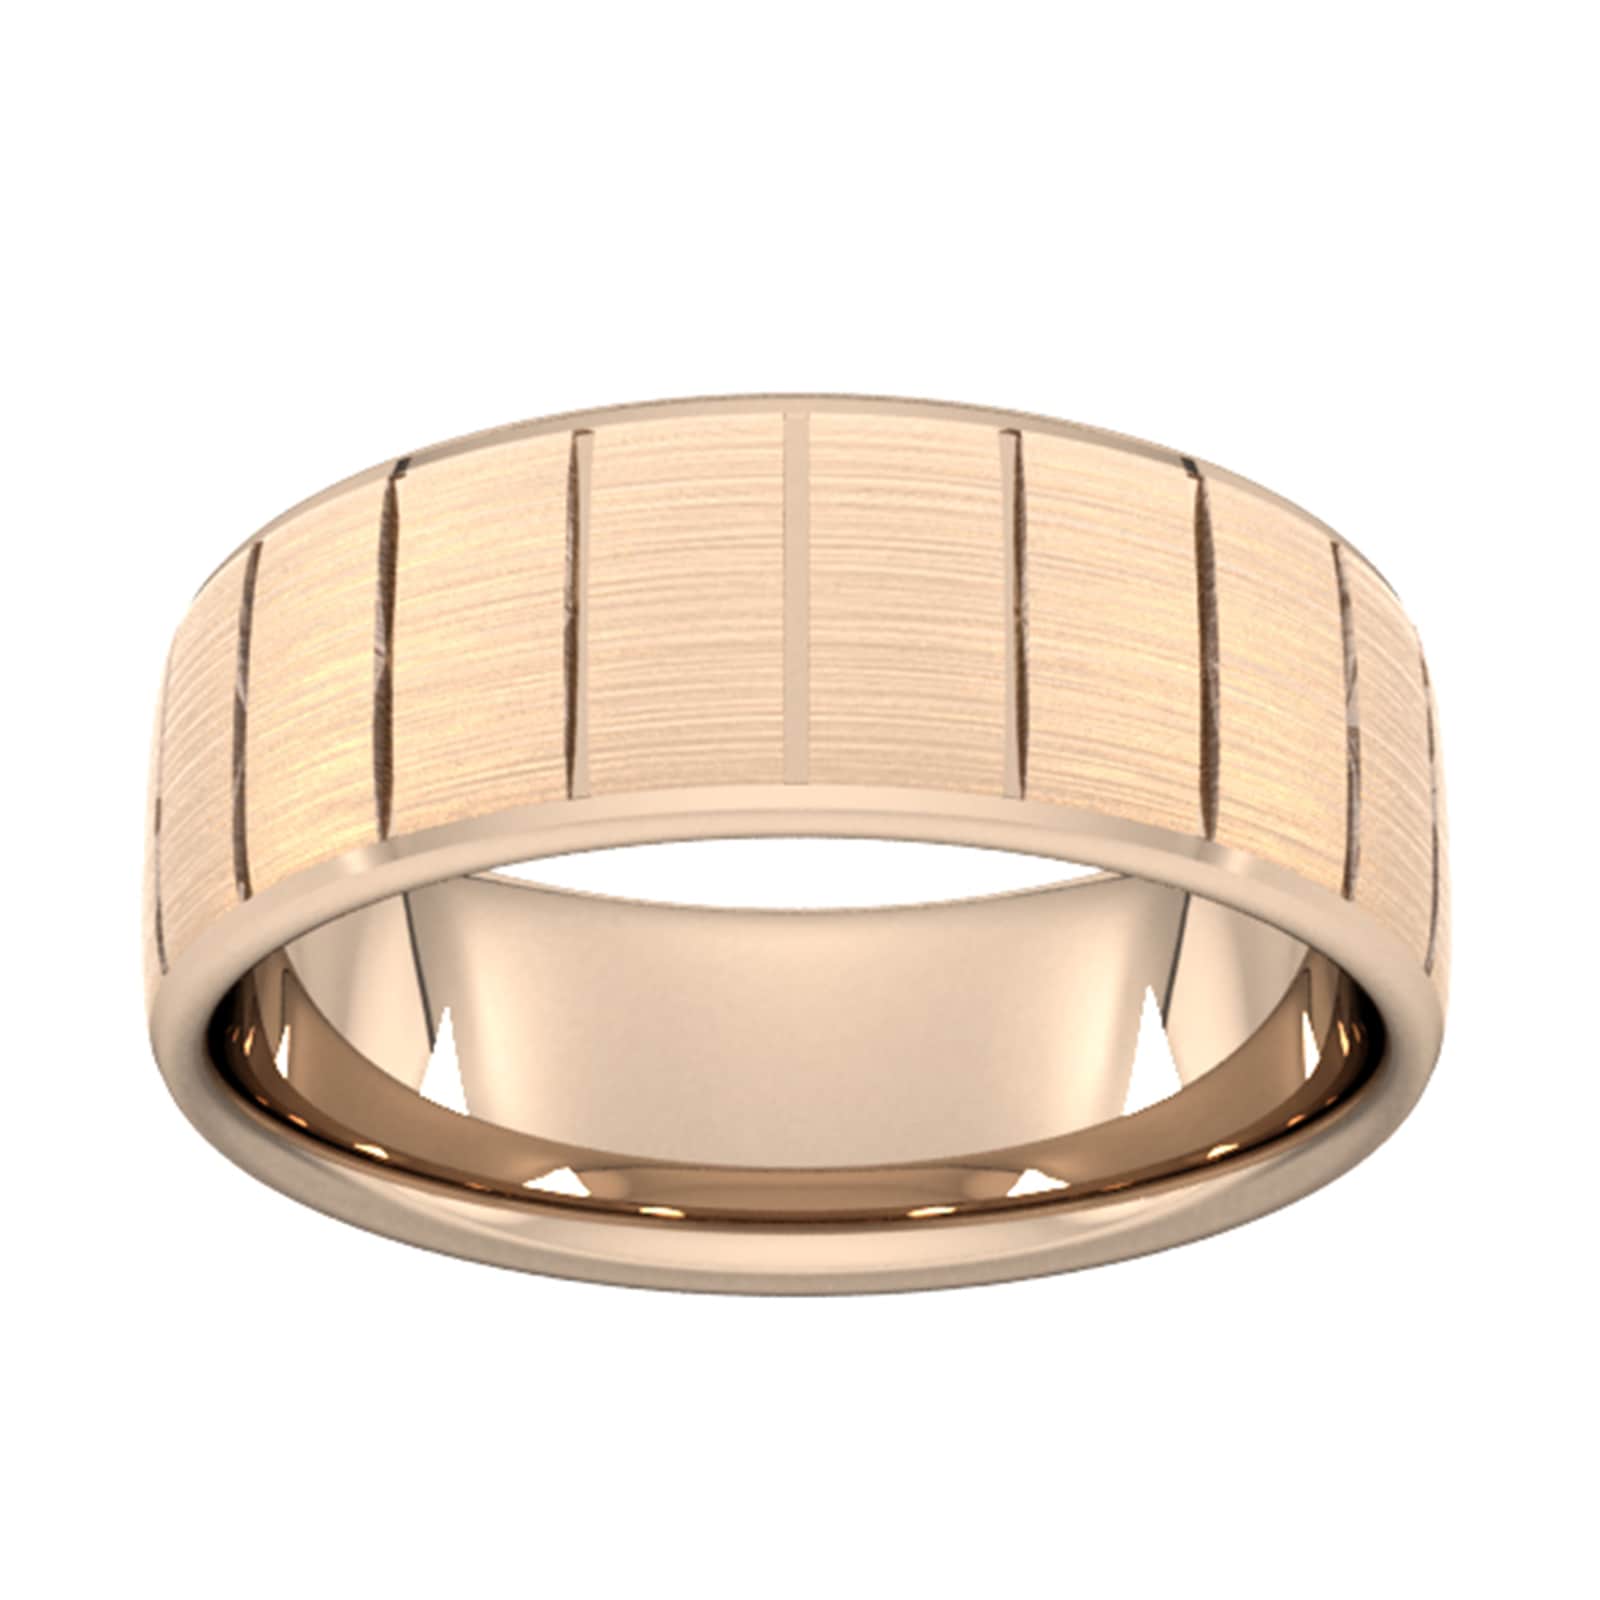 8mm Slight Court Heavy Vertical Lines Wedding Ring In 9 Carat Rose Gold - Ring Size T